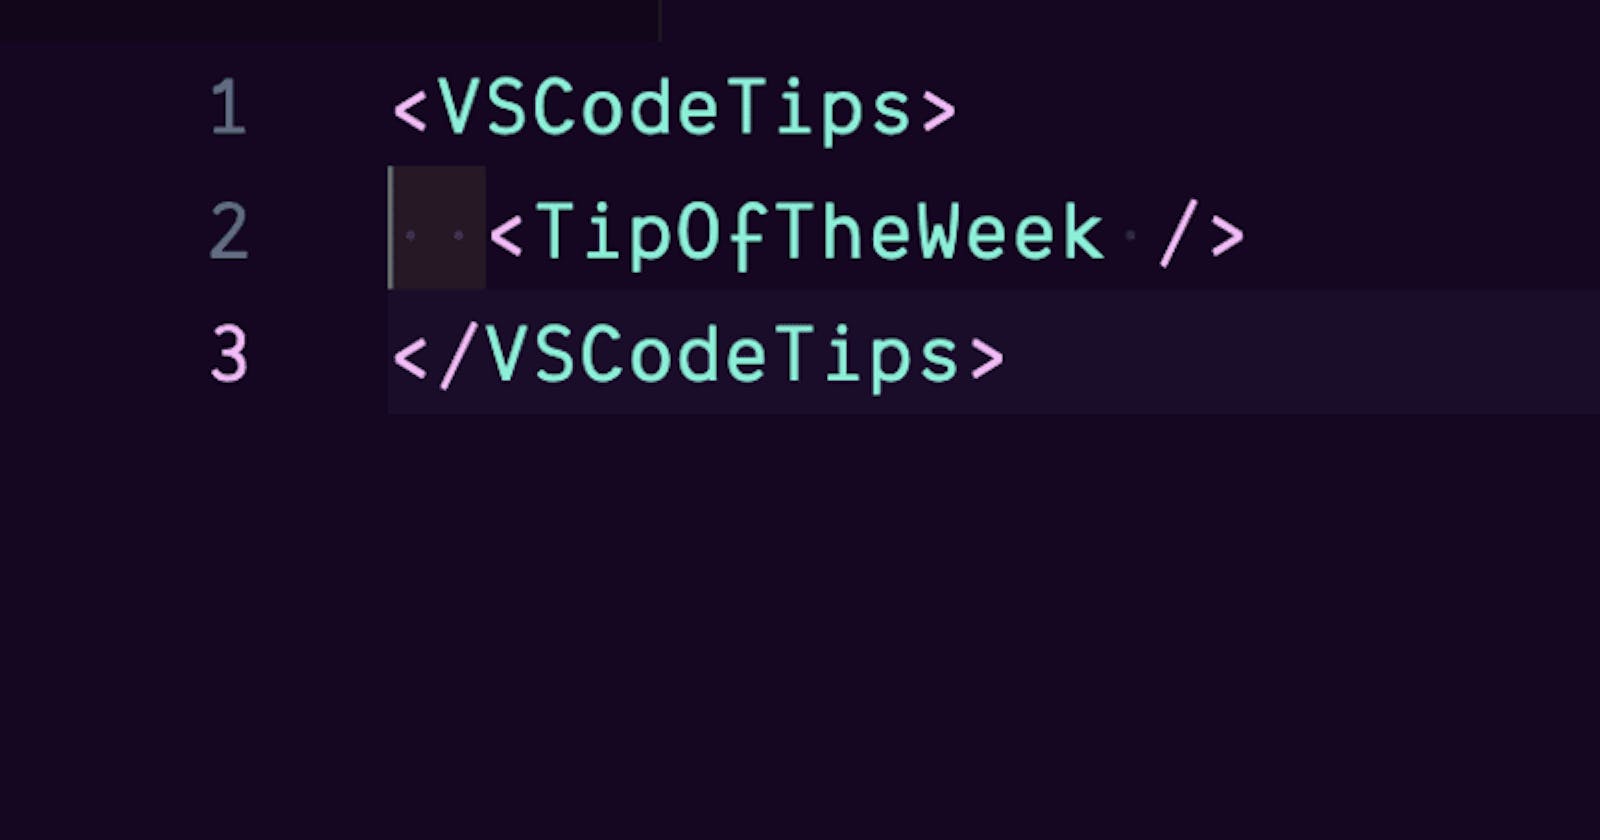 VS Code Tip of the Week: New Tailwind CSS language mode for VS Code